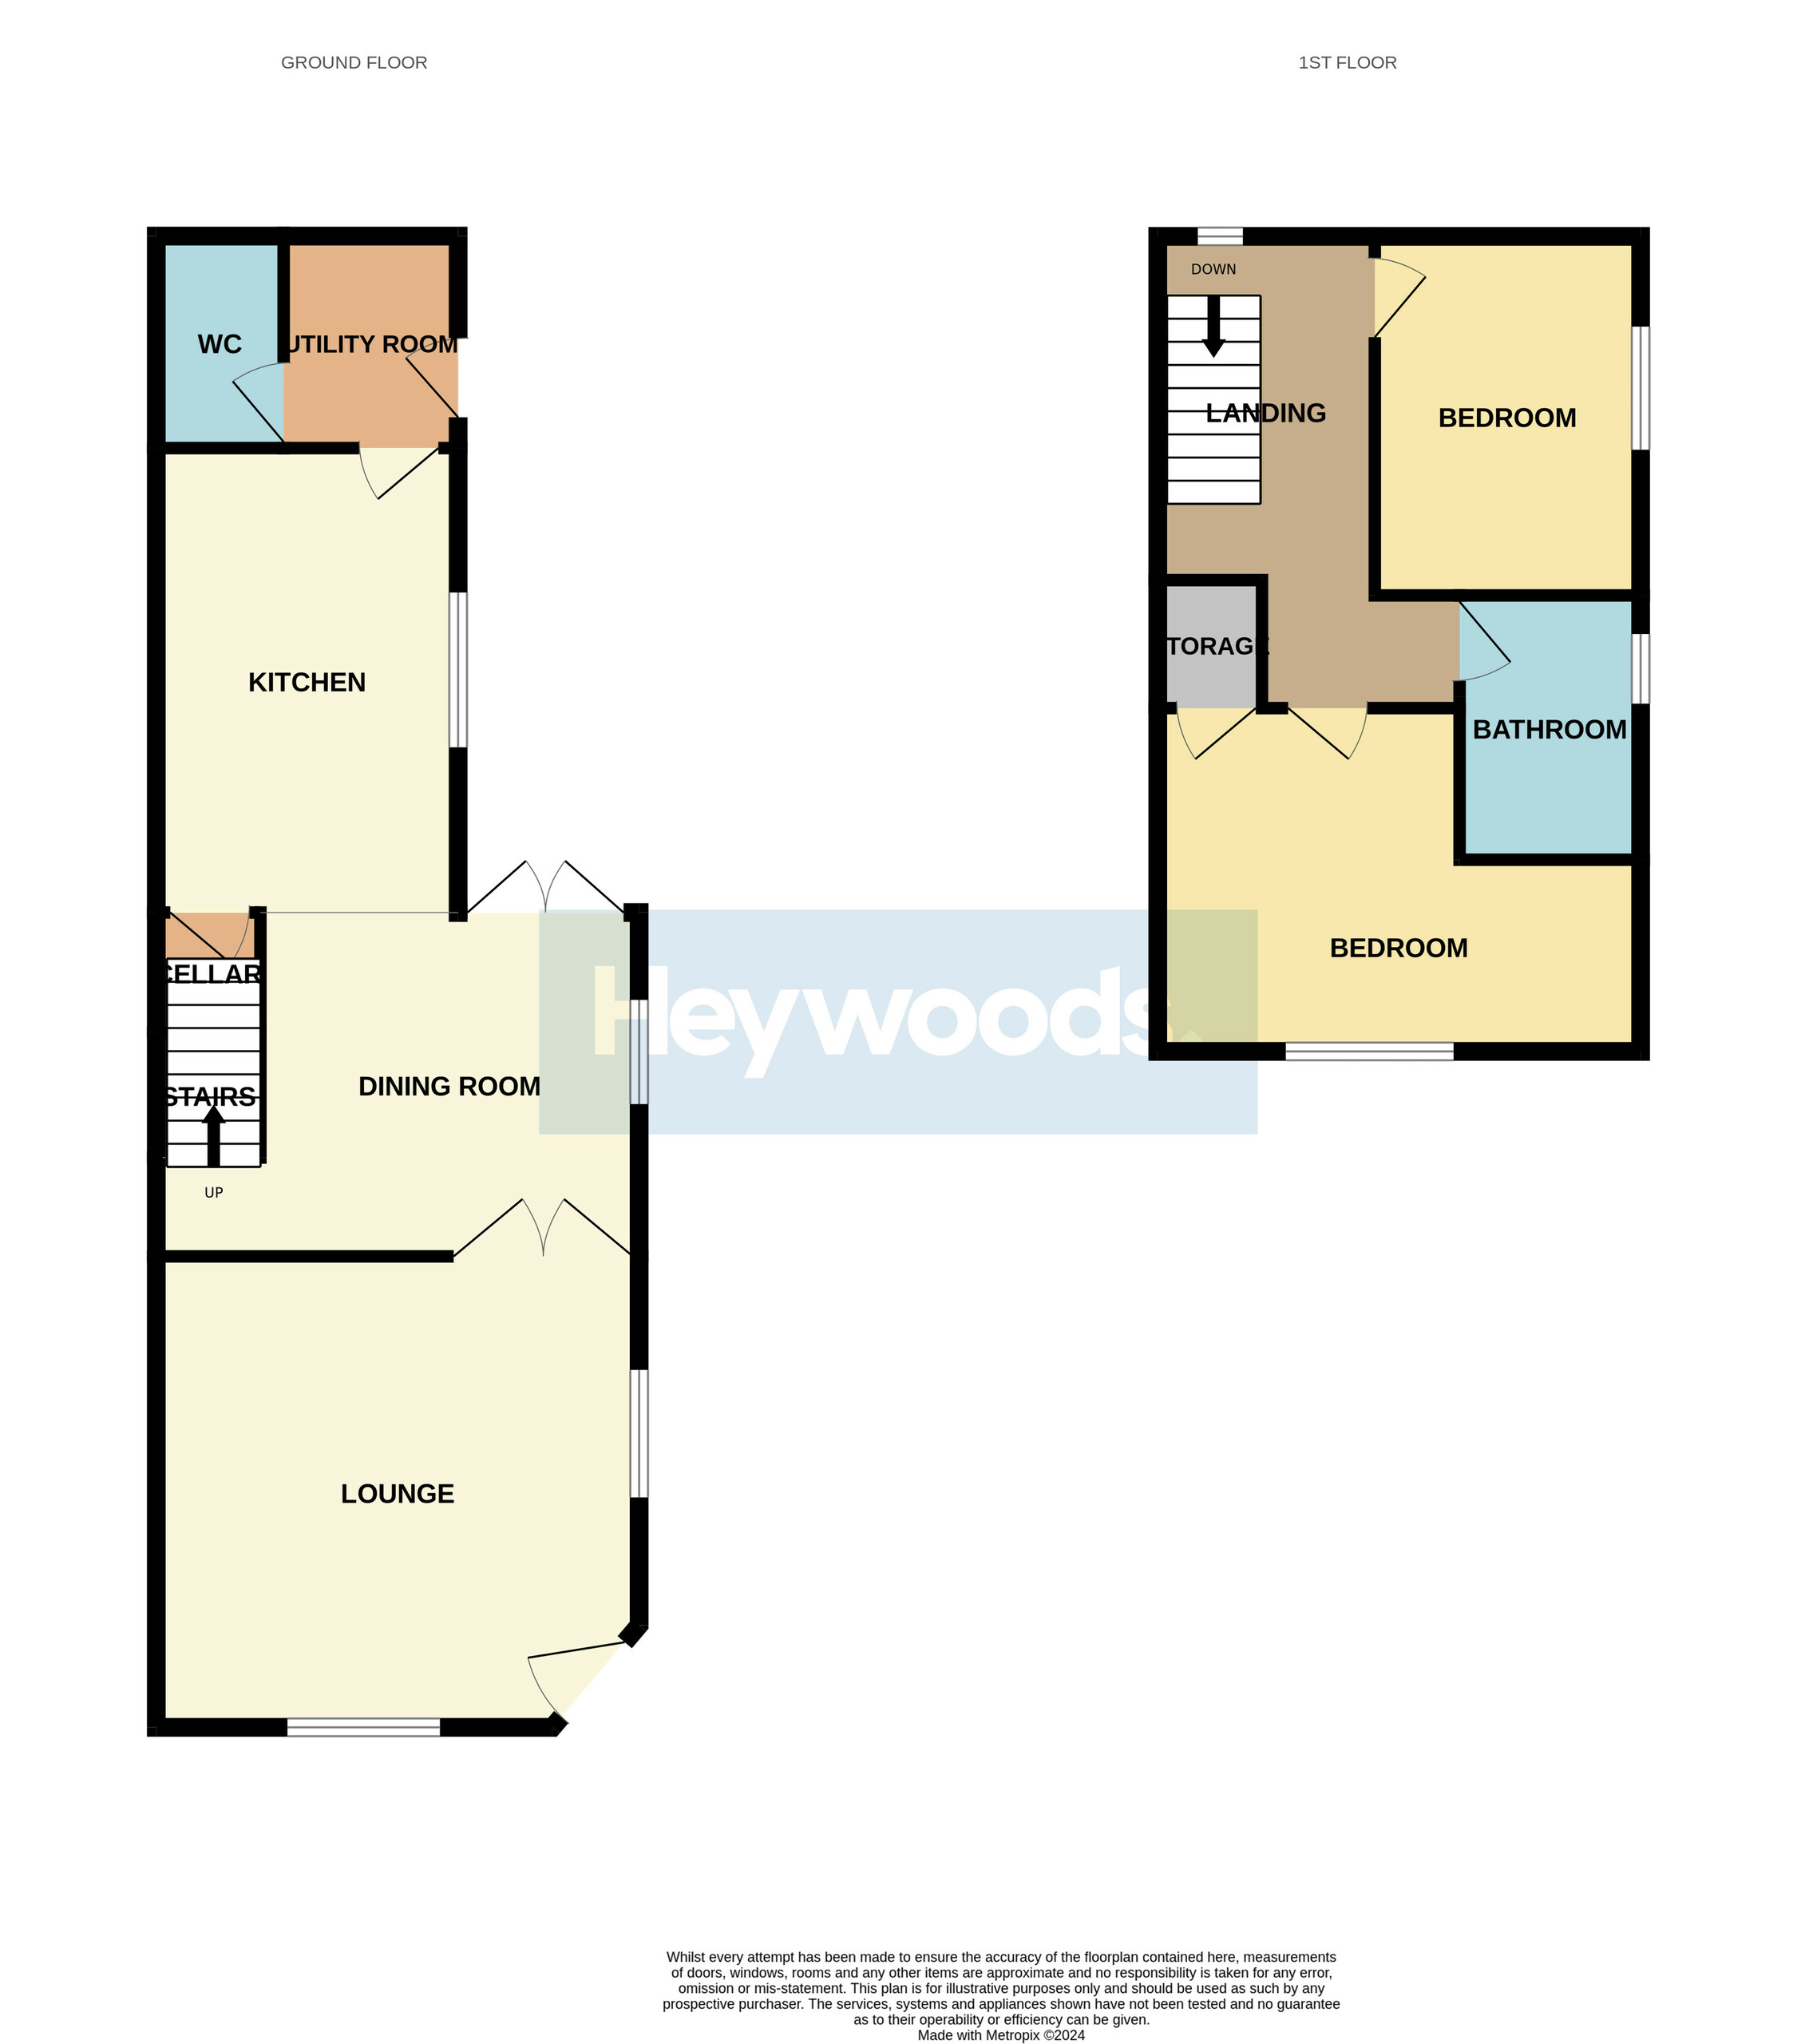 2 bed end of terrace house for sale in Fenton, Stoke-on-Trent - Property floorplan